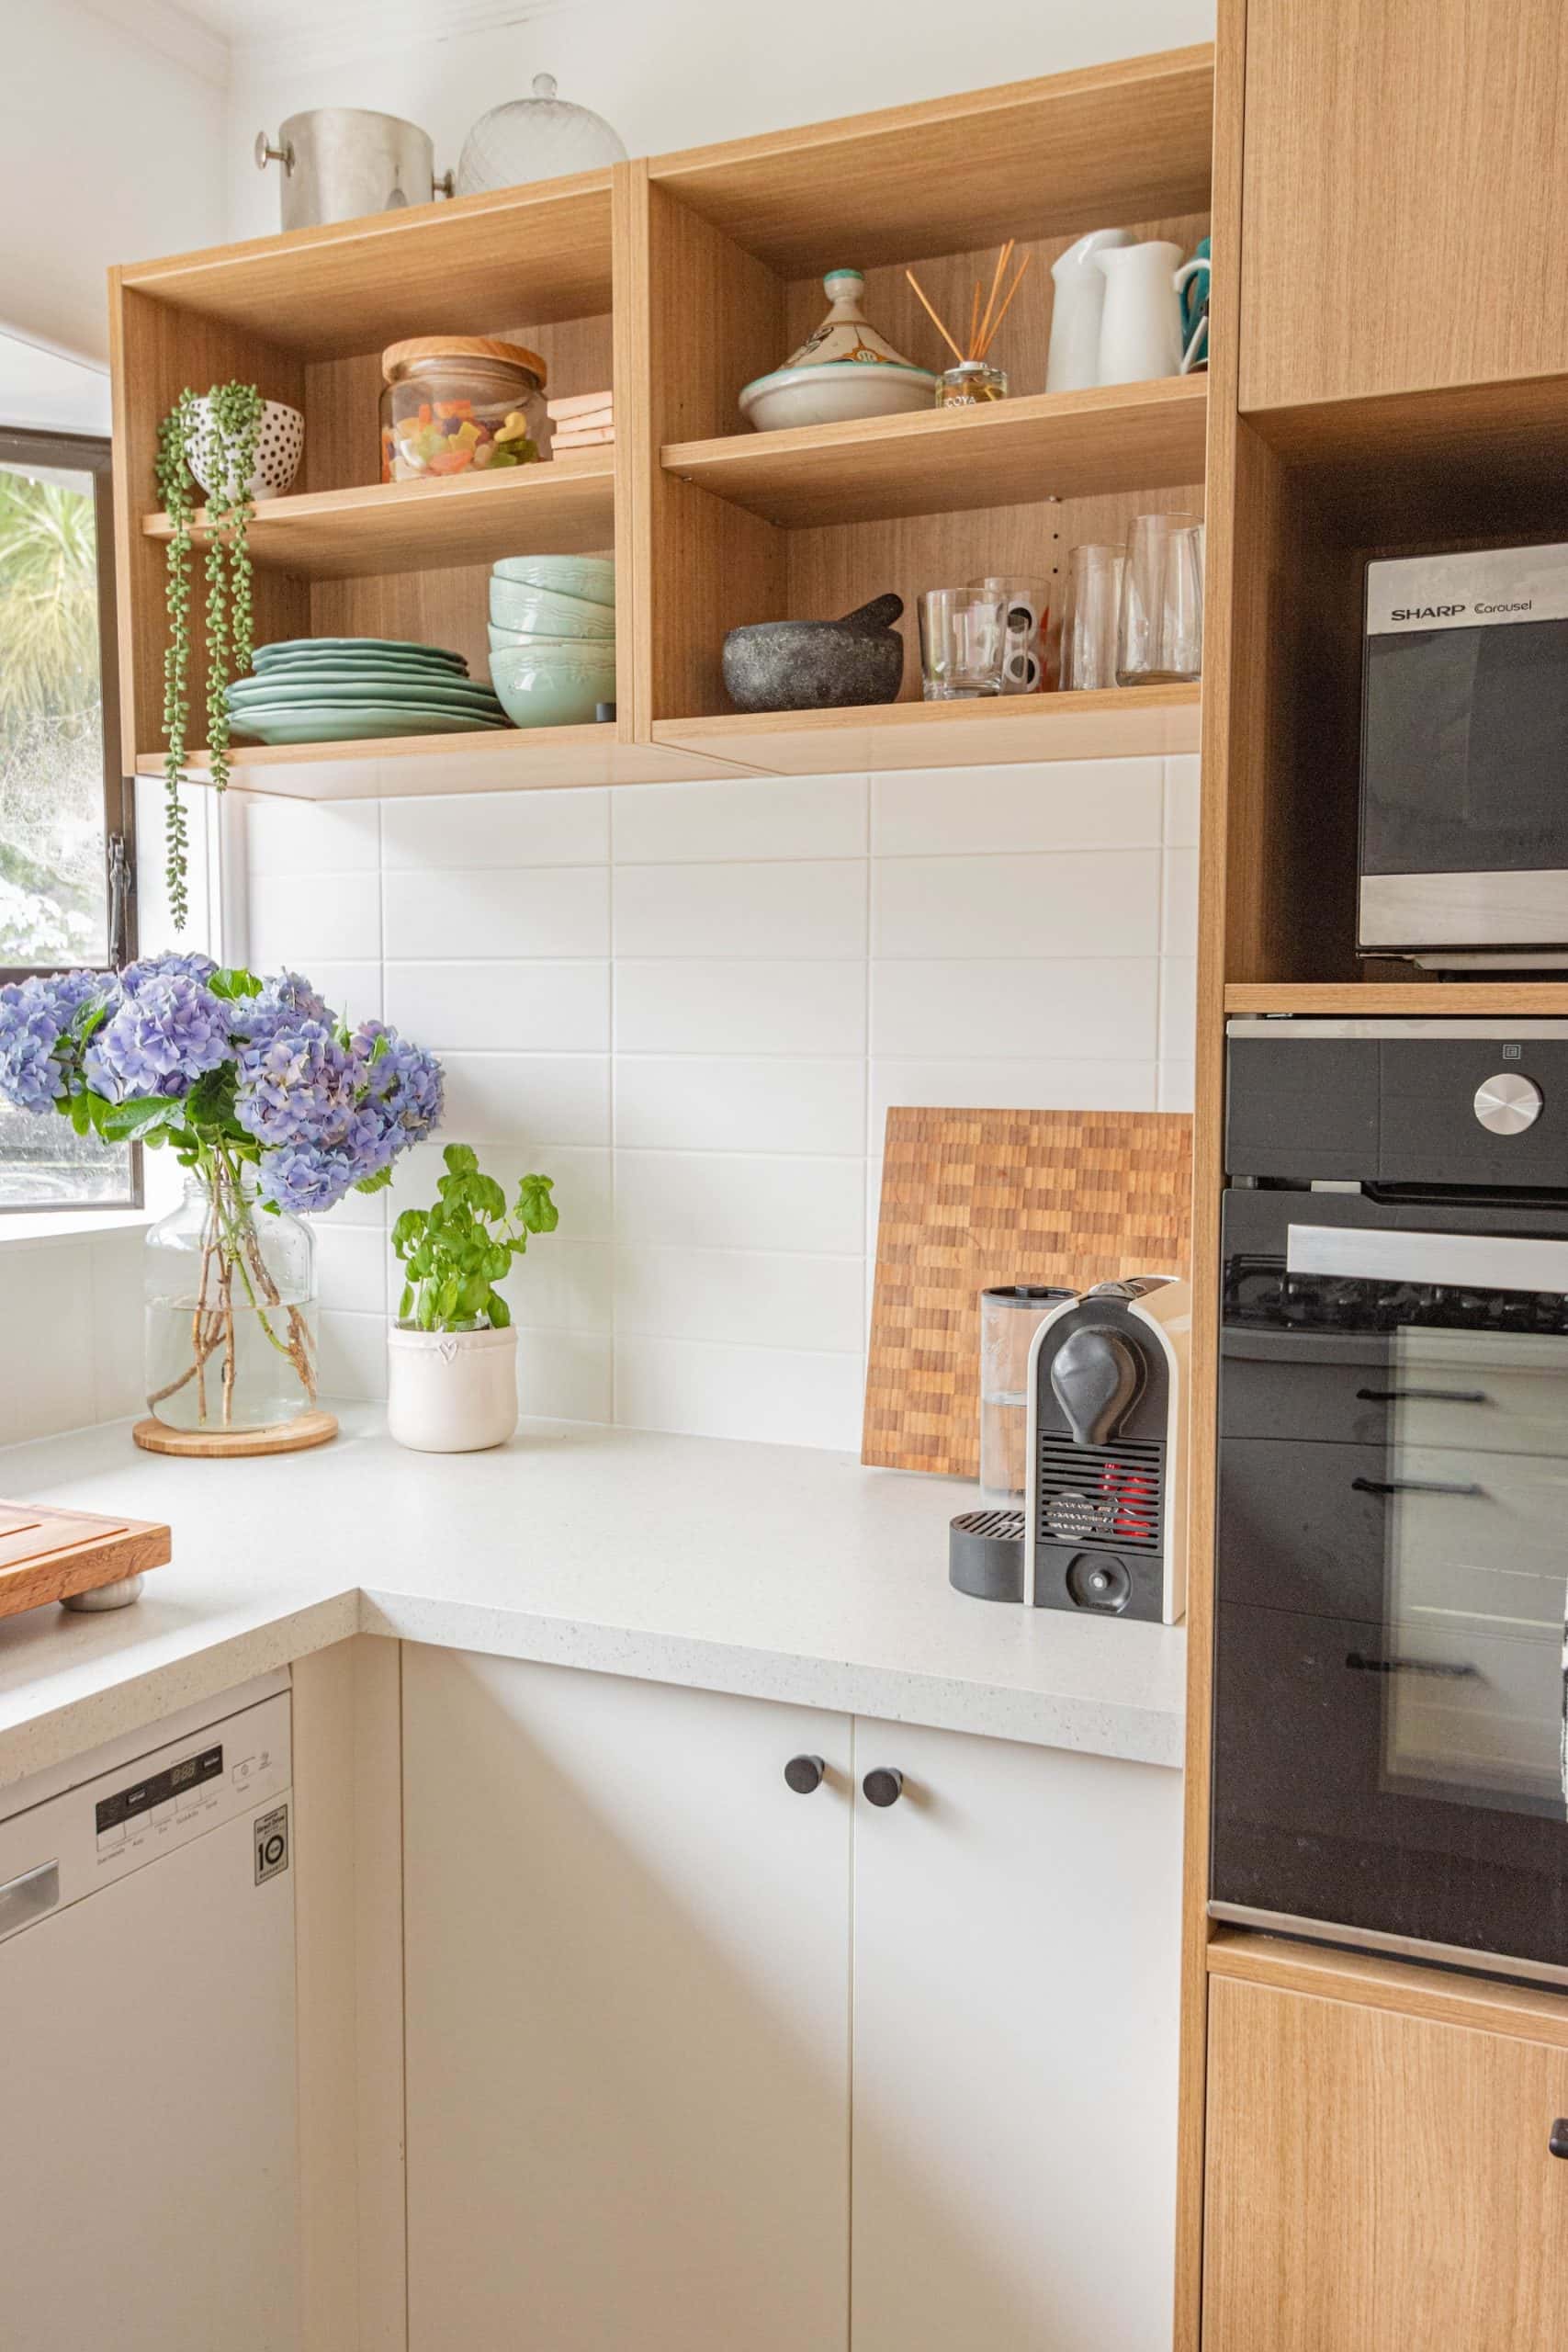 5 Must-Have Kitchen Accessories For Your Home - HomeLane Blog